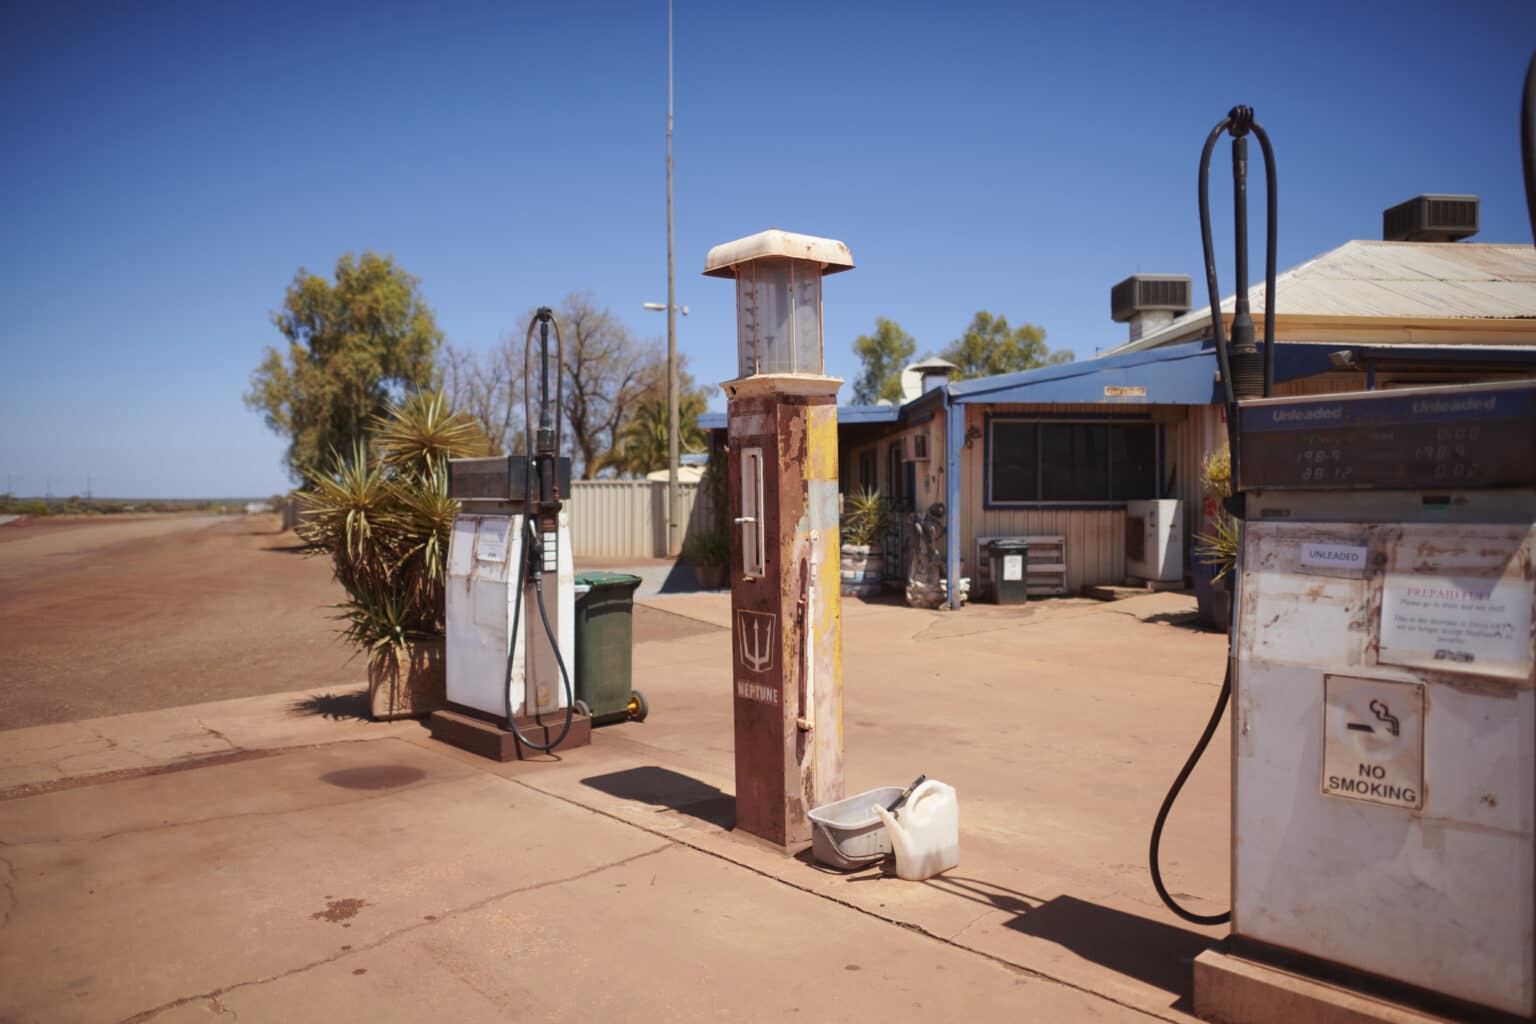 A rusty service station in the outback.